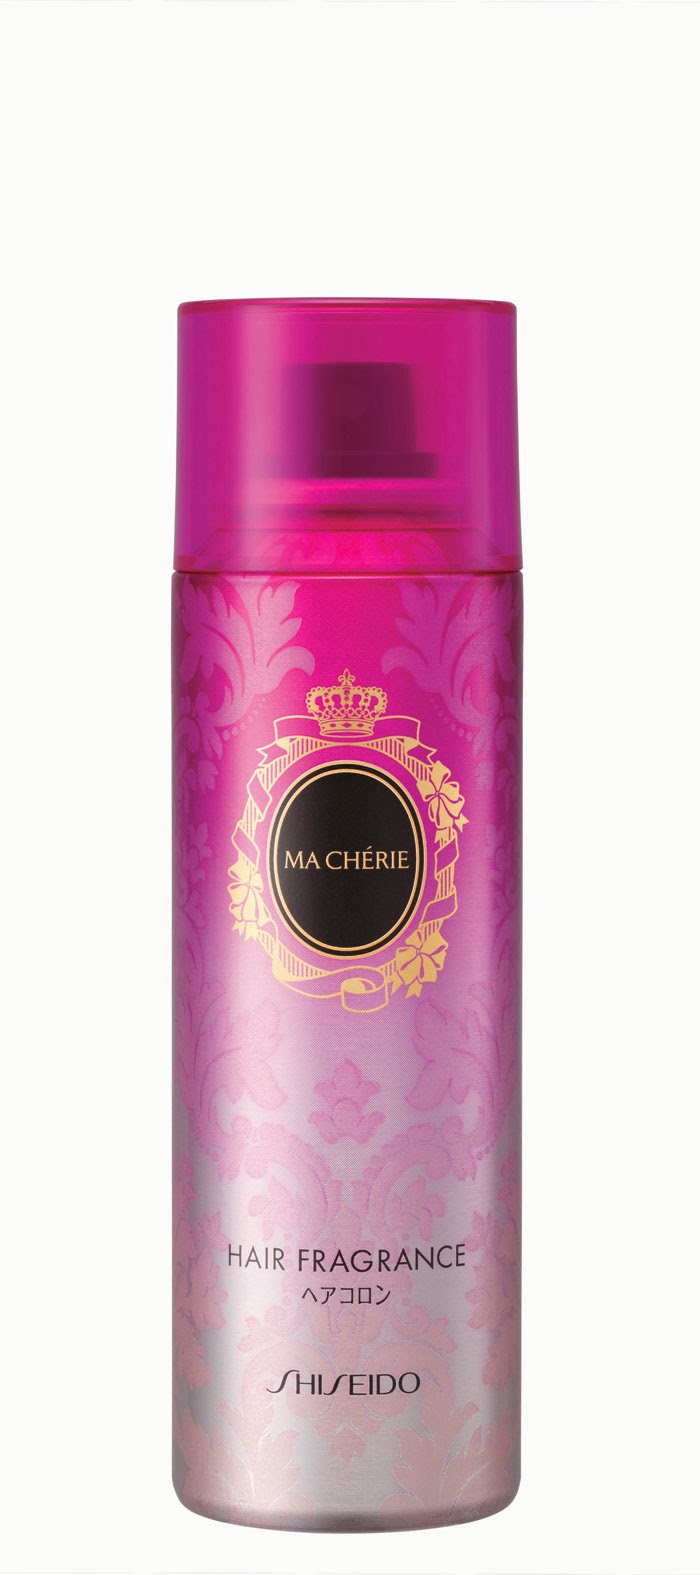 Ma Cherie Hair Fragrance Product Review